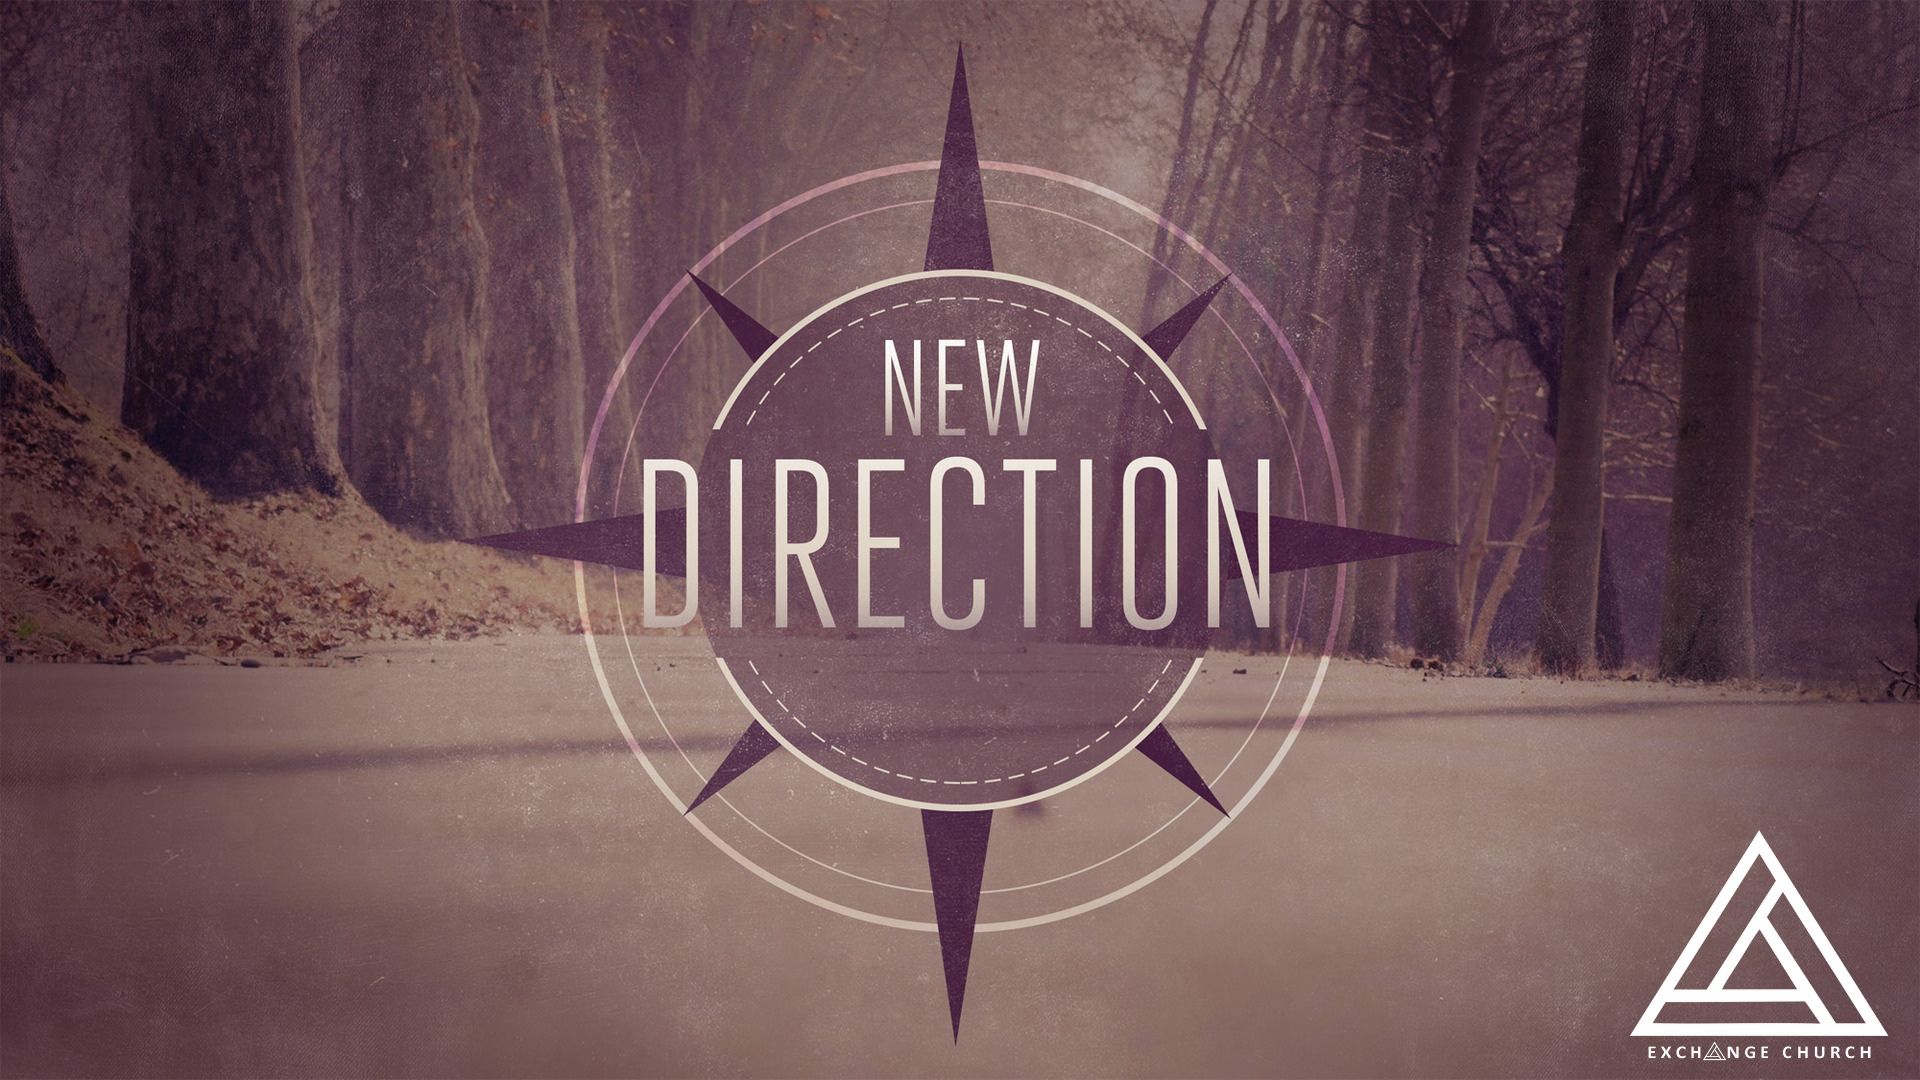 New Direction